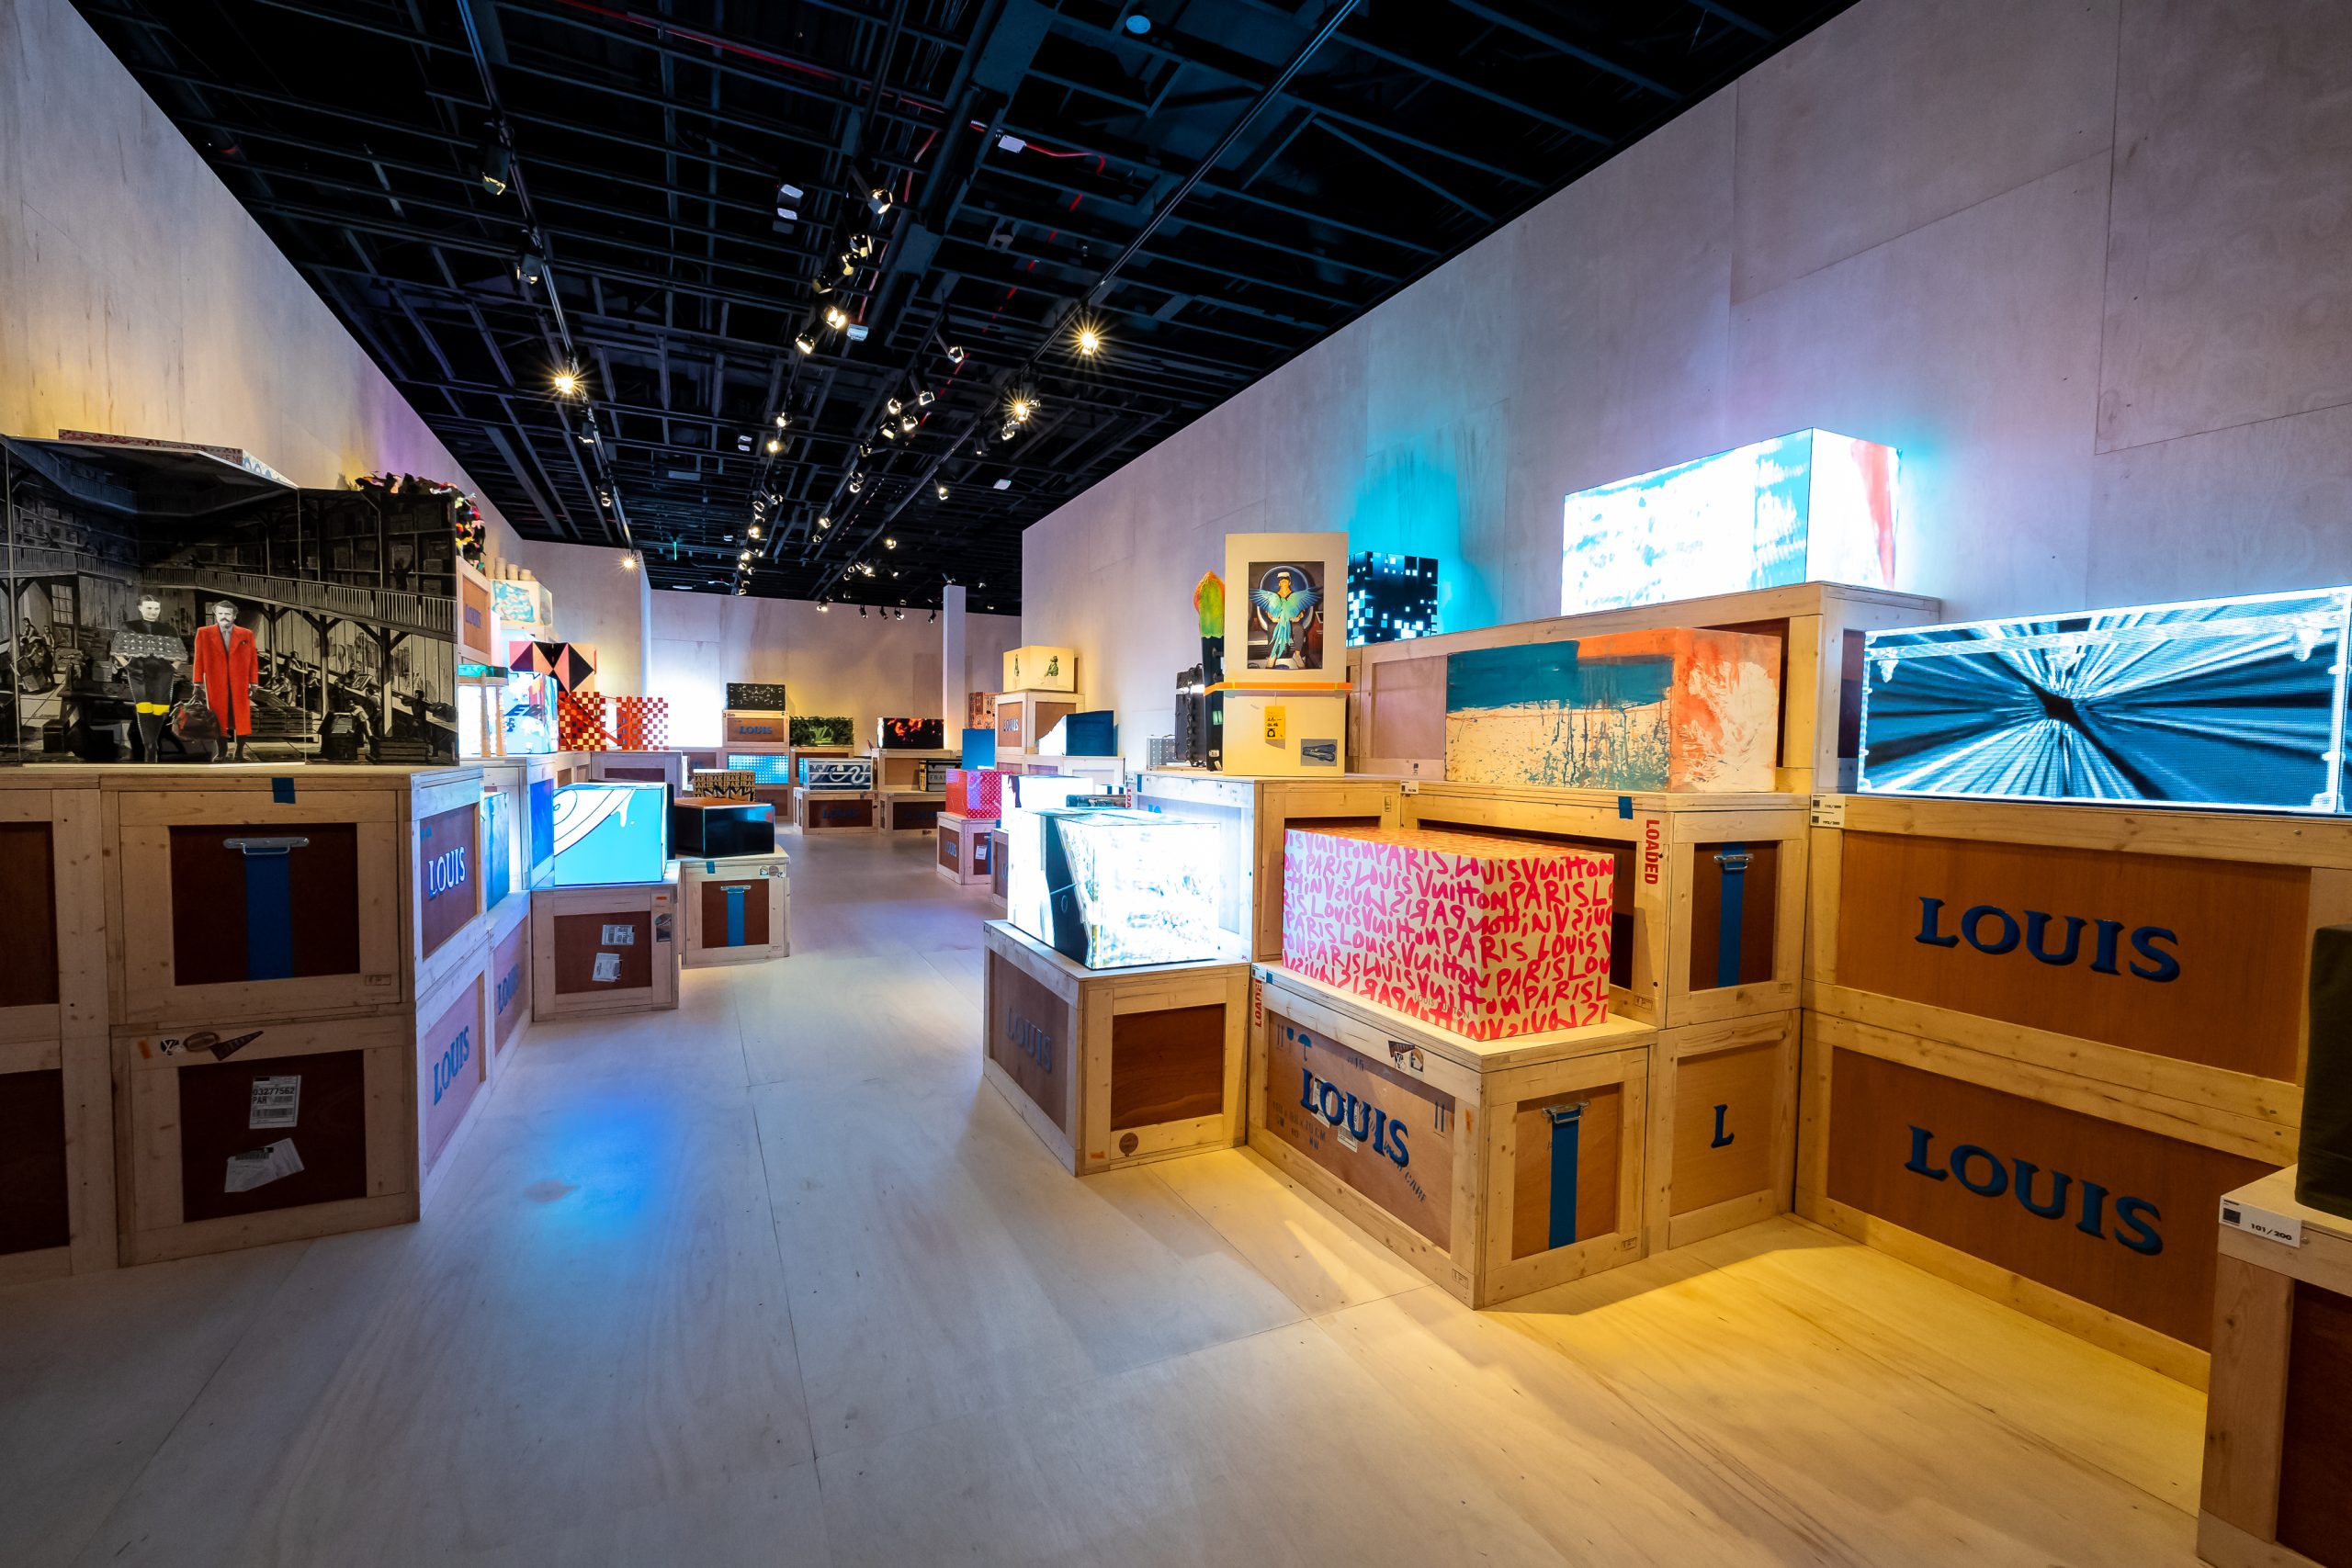 200 Trunks, 200 Visionaries – the marketing transmedia of Luis Vuitton